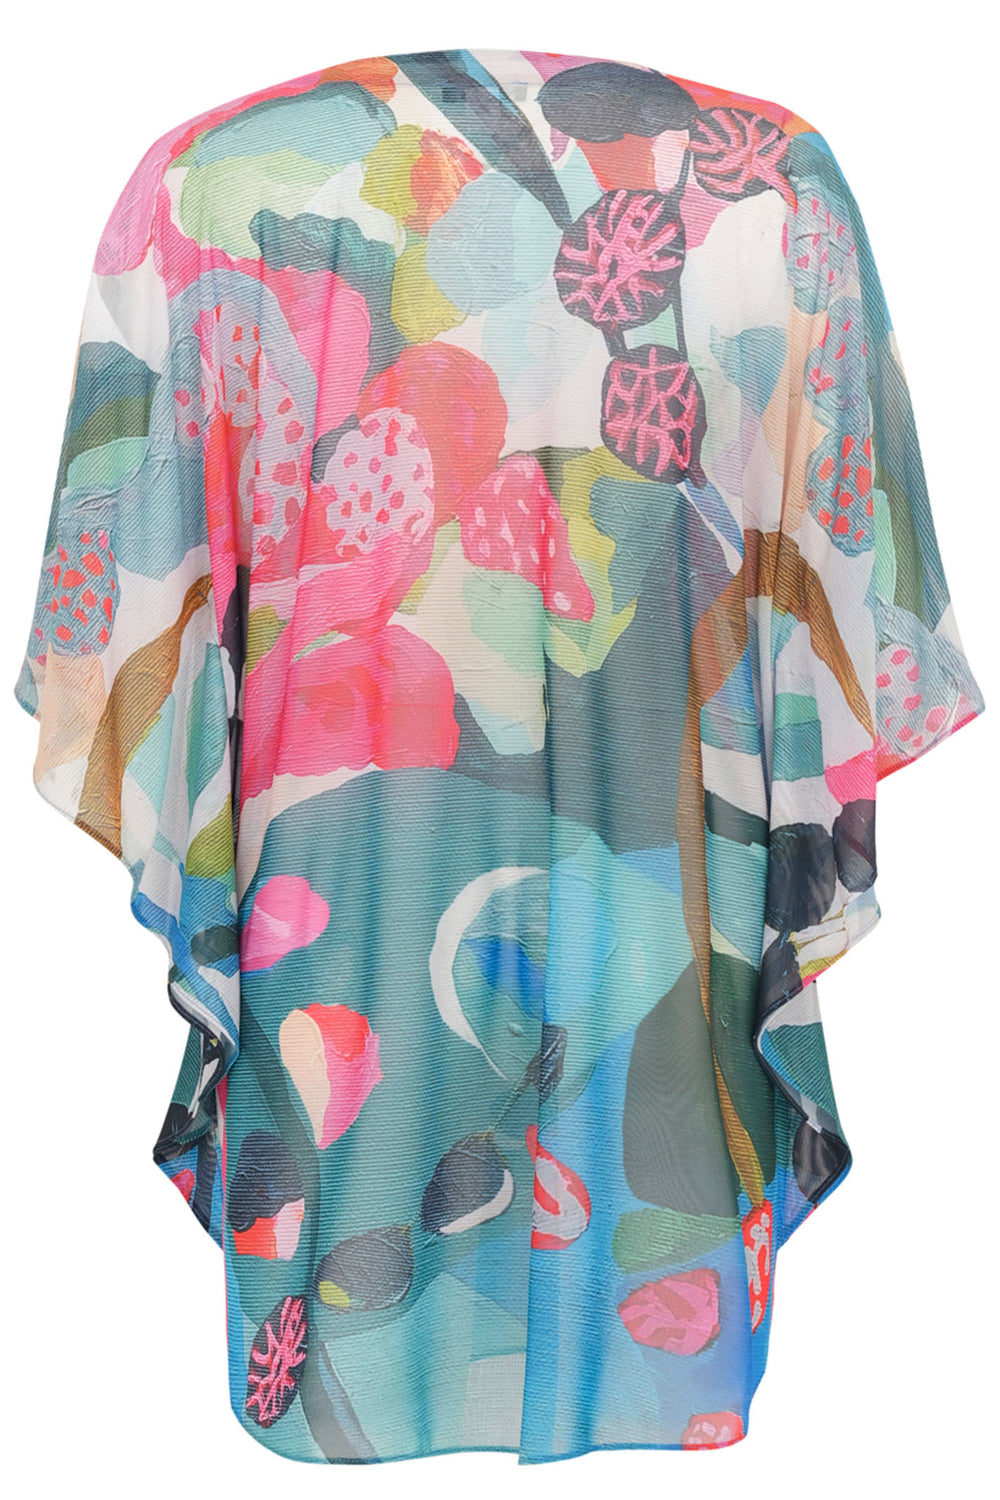 Dolcezza 24803 Pink Simply Art Irene Guerriero Rumba Print Cover Up - Shirley Allum Boutique